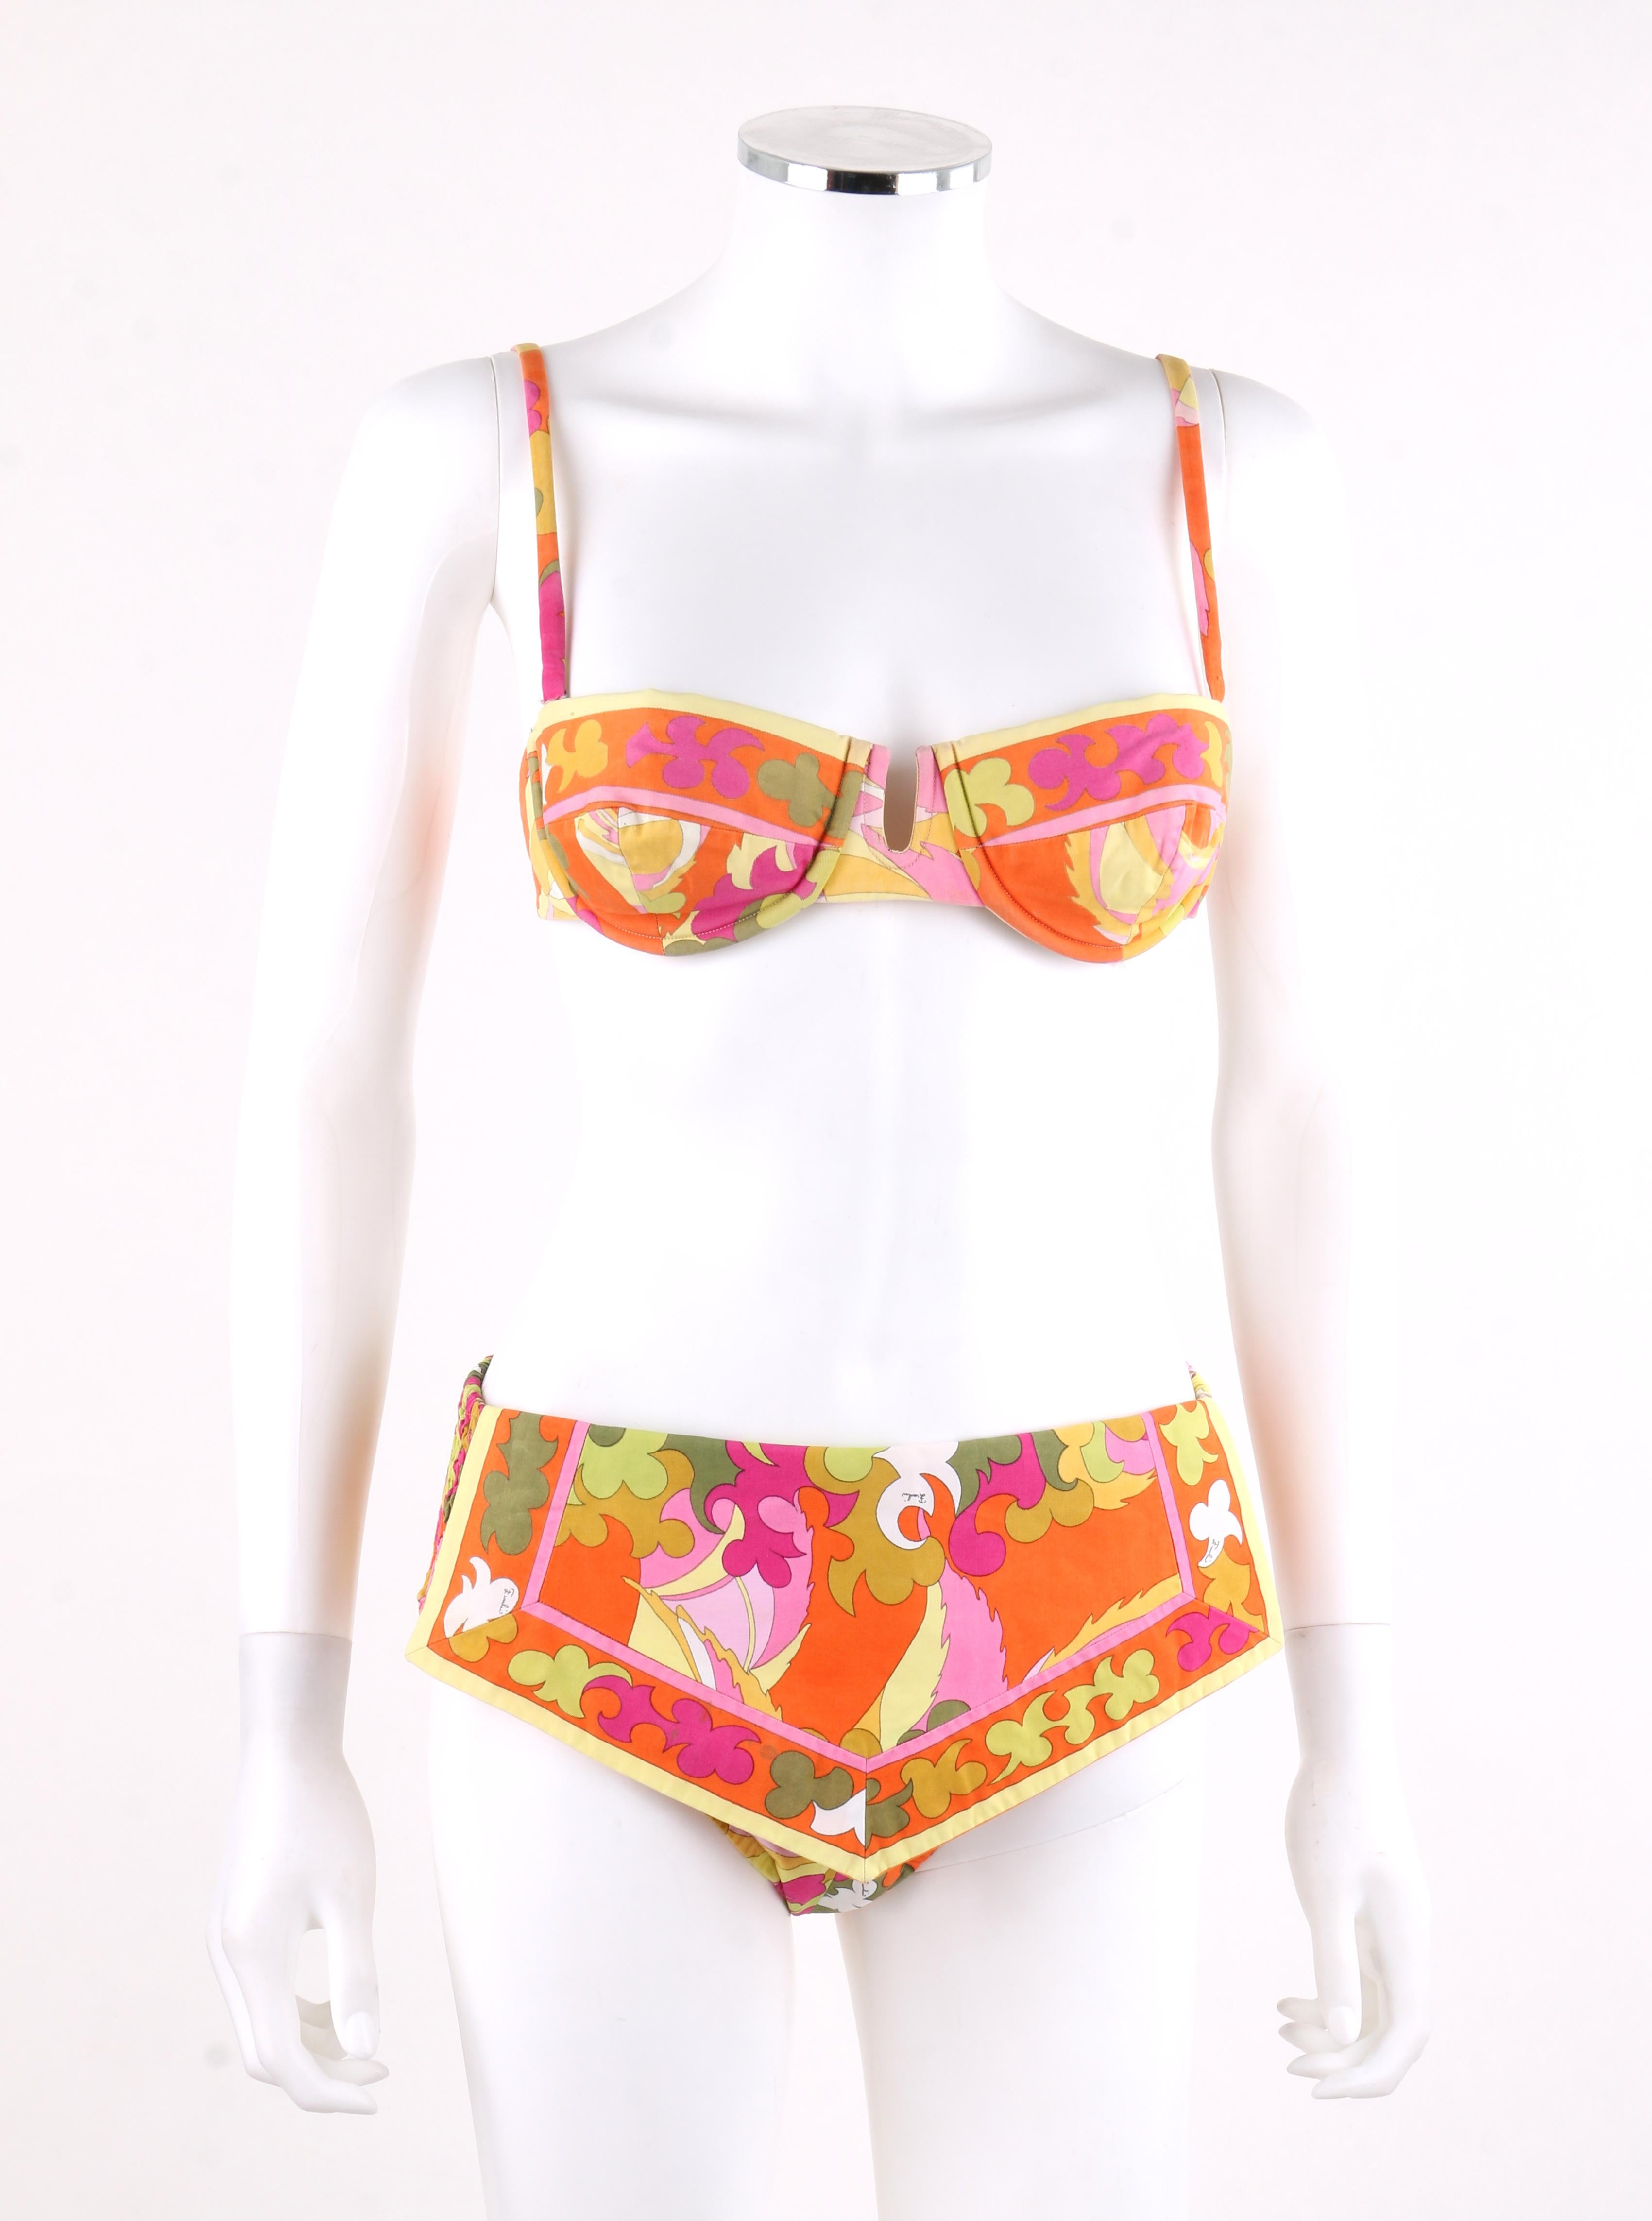 EMILIO PUCCI c.1970’s Multi-color Signature Print 2 Pc Bikini Swimsuit
 
Circa: 1970’s
Label(s): Emilio Pucci / Exclusively for Sak’s Fifth Avenue  
Style: Bikini
Color(s): Shades of orange, pink, green, yellow and white. 
Lined: Yes
Marked Fabric